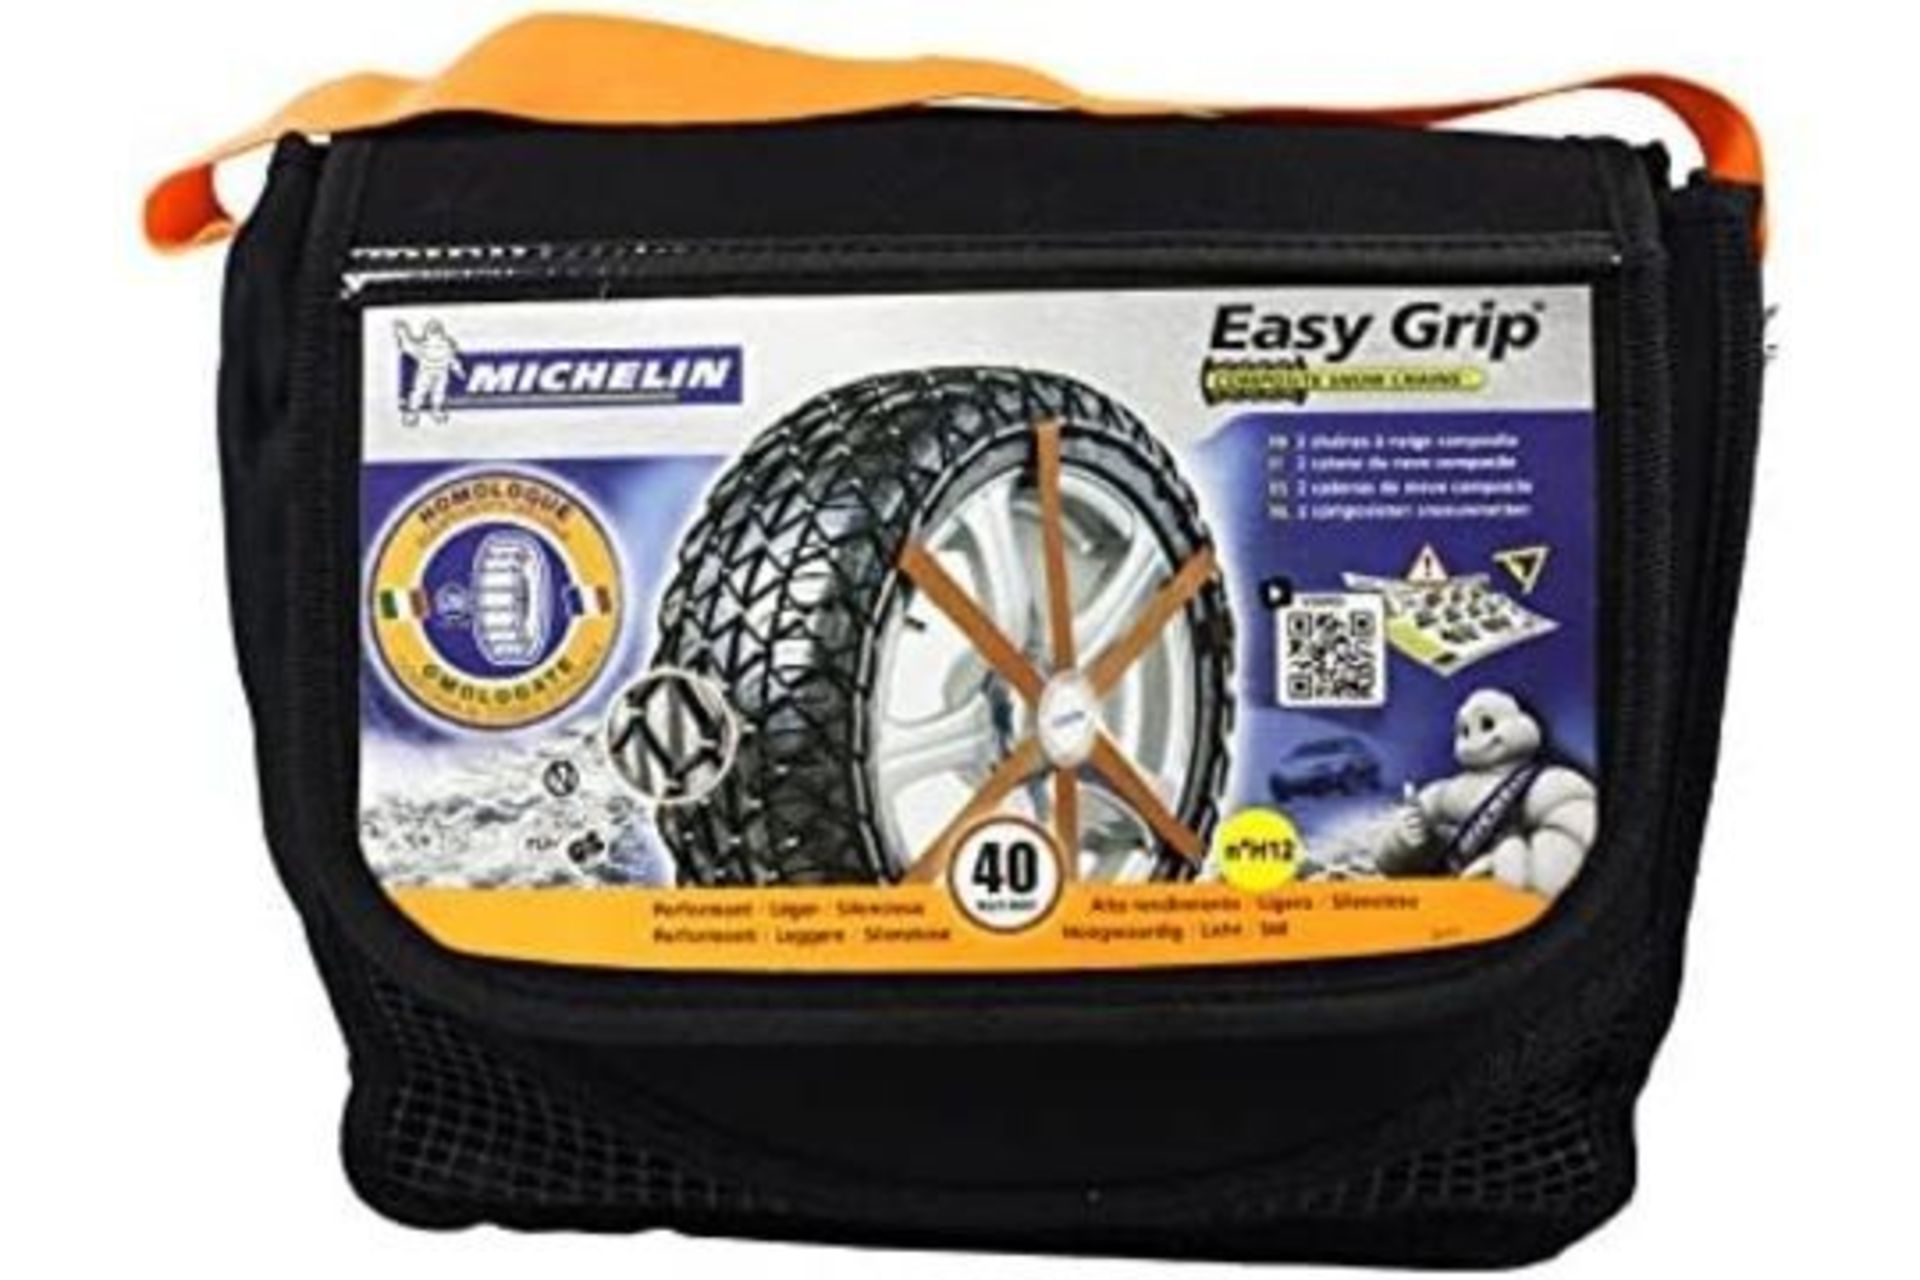 5 X NEW PACKAGED SETS OF MICHELIN 7901 Easy Grip Snow Chains H12. RRP £82.95 EACH. Michelin 7901